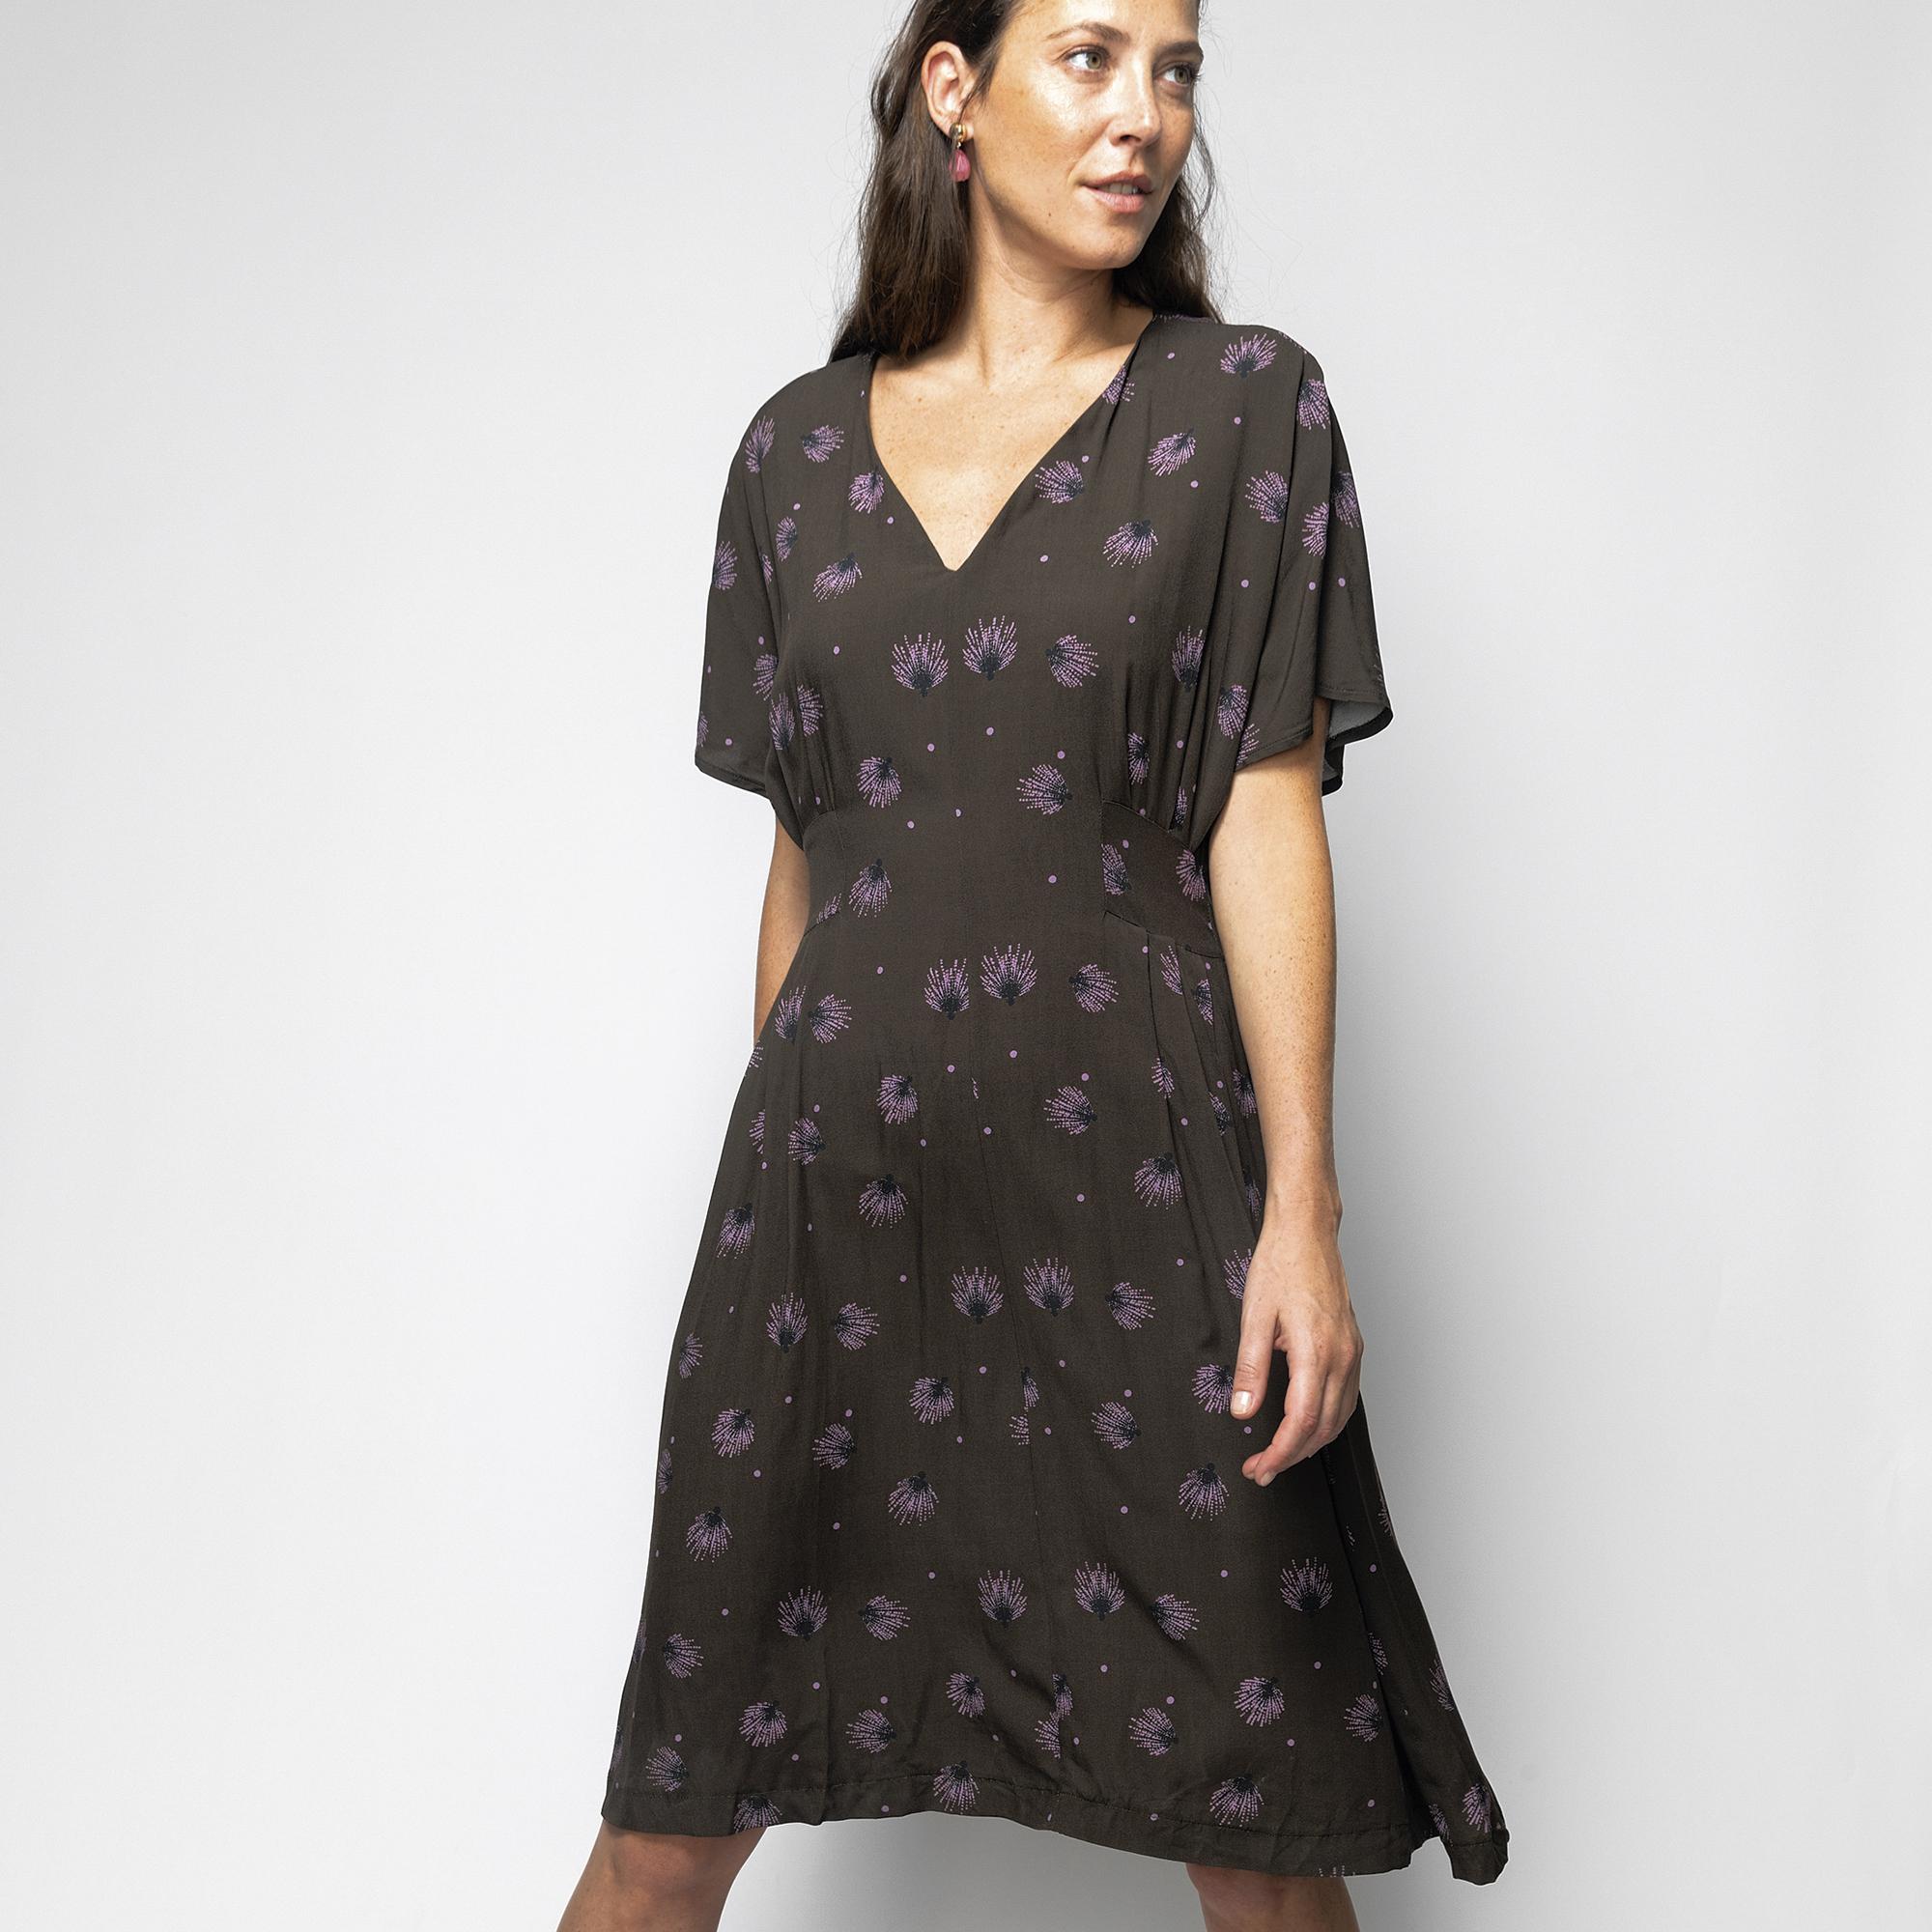 Elevate Your Wardrobe: Introducing The Carline Dress Sewing Pattern!